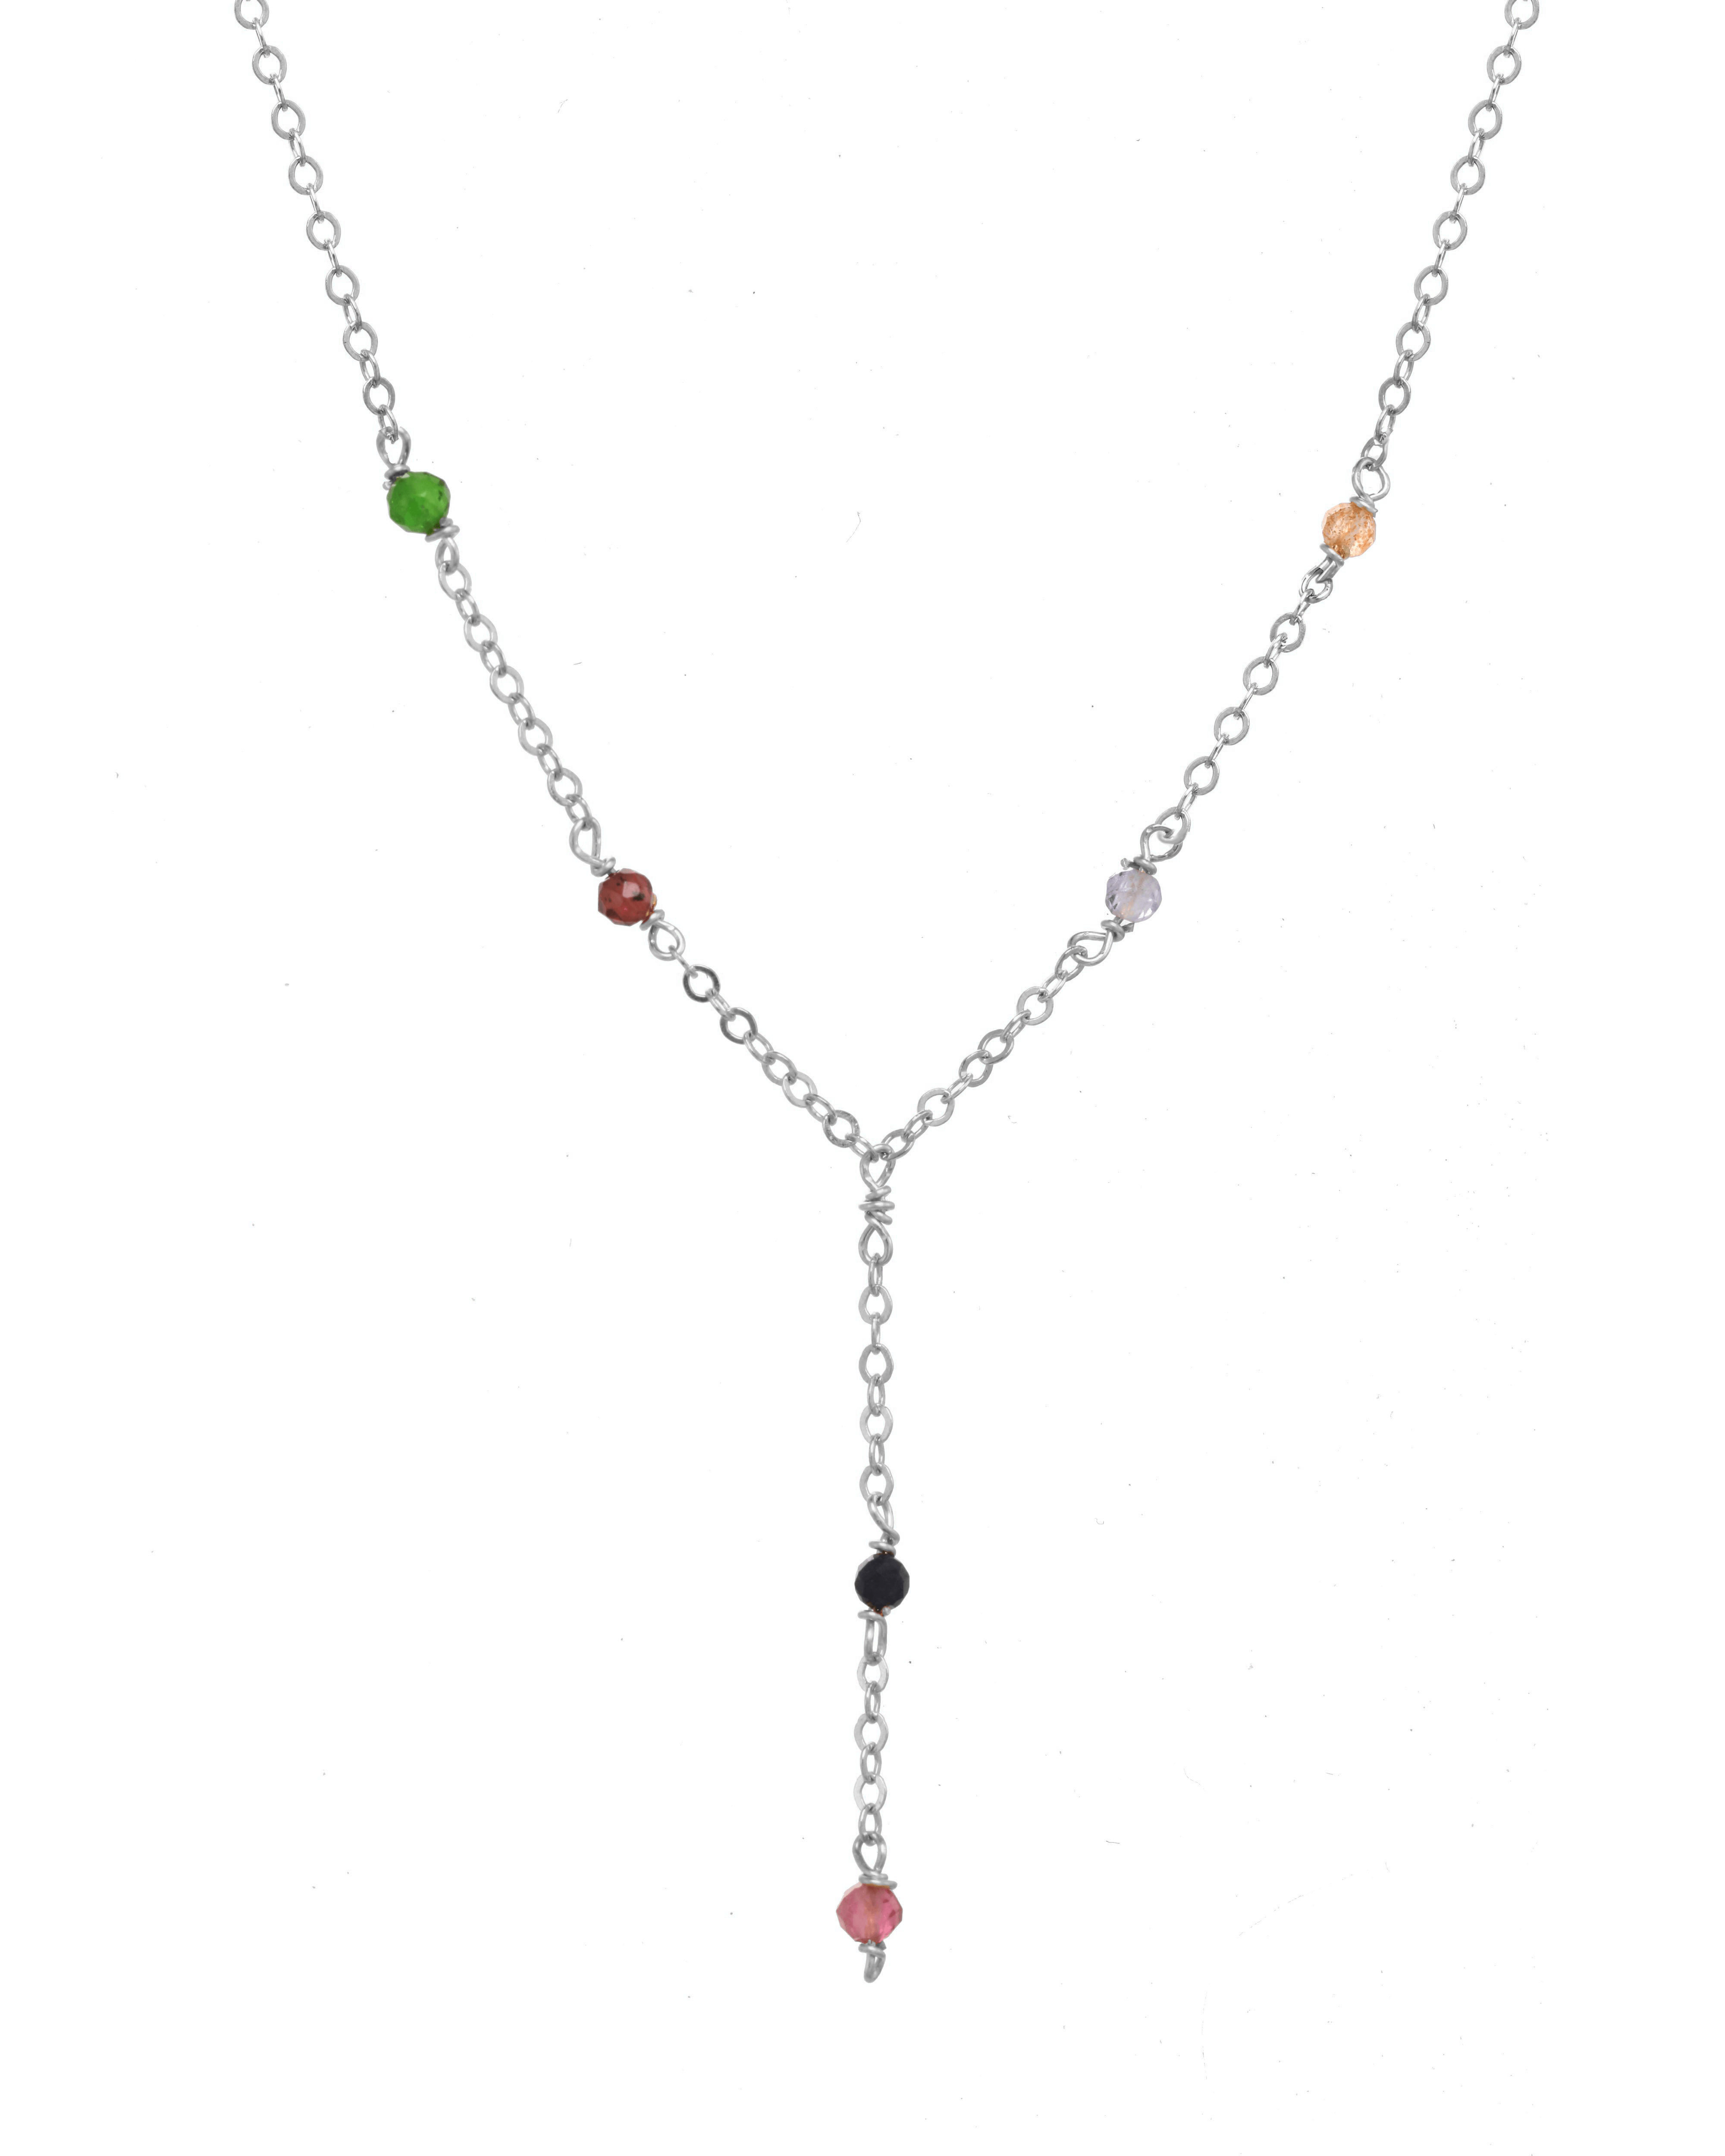 Safron Necklace by KOZAKH. A 16 to 18 inch adjustable length, lariat style necklace, crafted in Sterling Silver, featuring 2mm Faceted round Emerald, Garnet, Sapphire, Tourmaline, Tanzanite and Topaz.